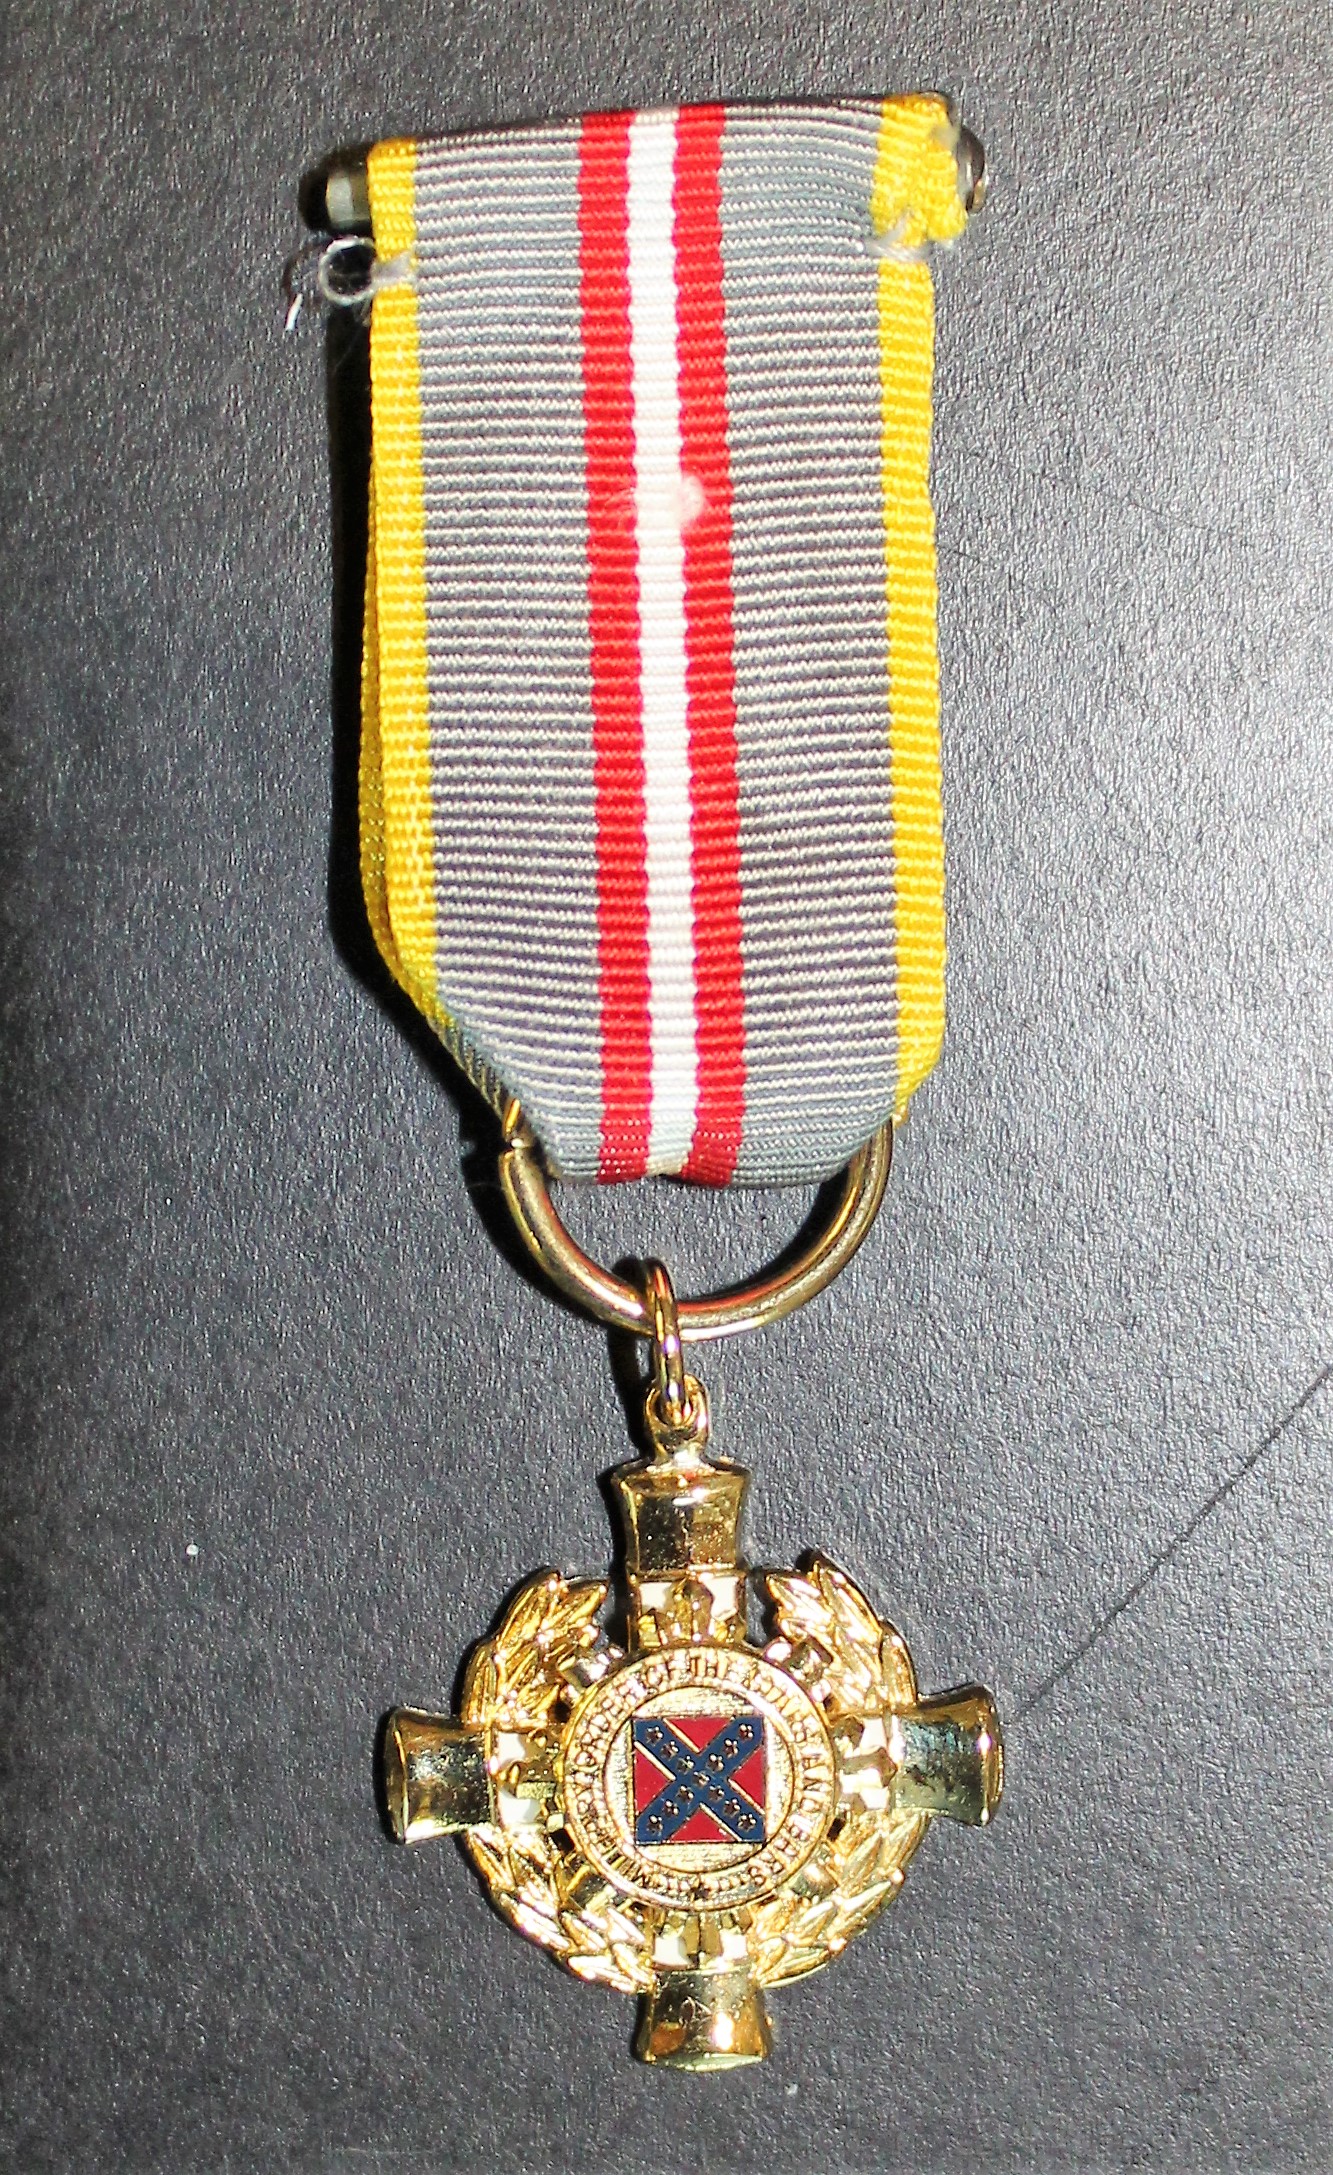 GEC and Staff Medal, mini, pin fastener